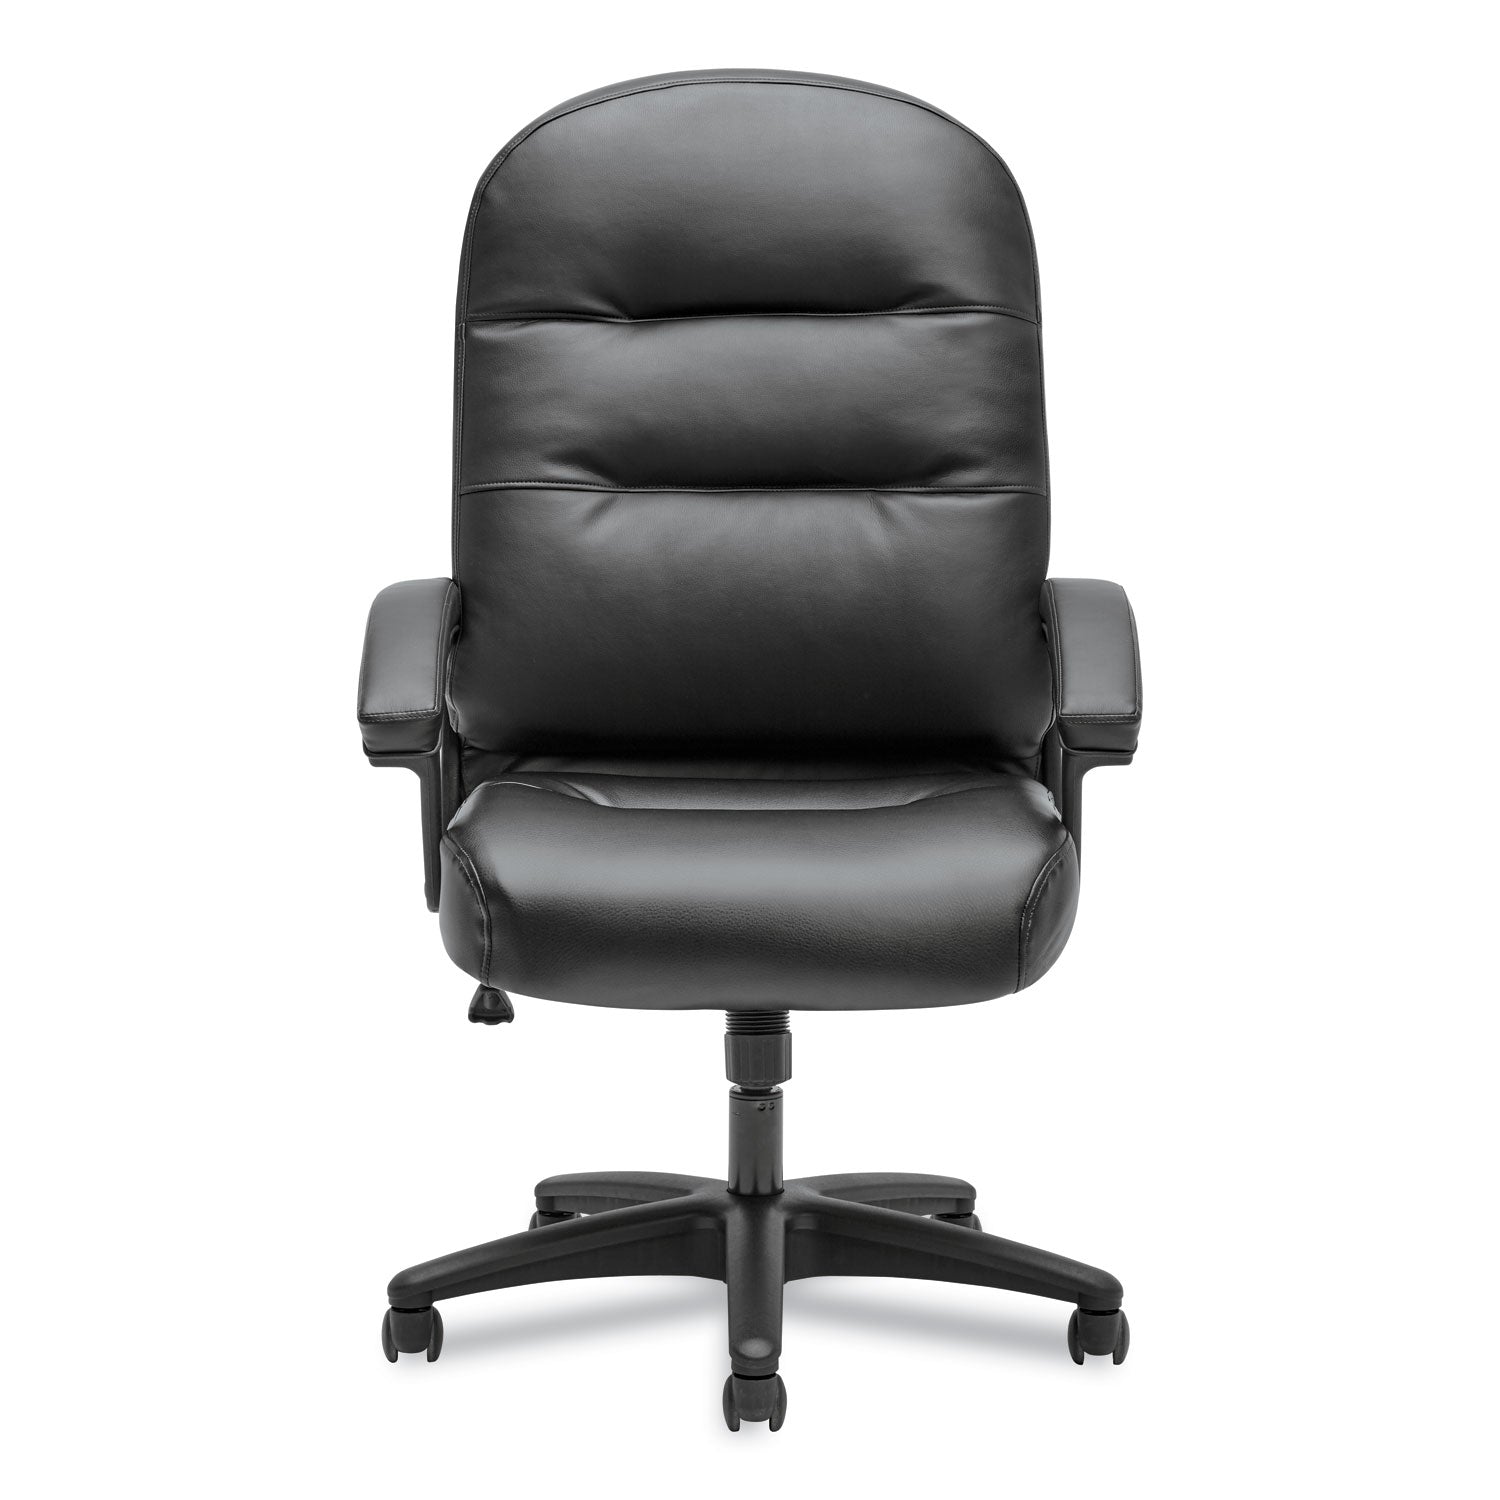 pillow-soft-2090-series-executive-high-back-swivel-tilt-chair-supports-up-to-250-lb-16-to-21-seat-height-black_hon2095hpwst11t - 1